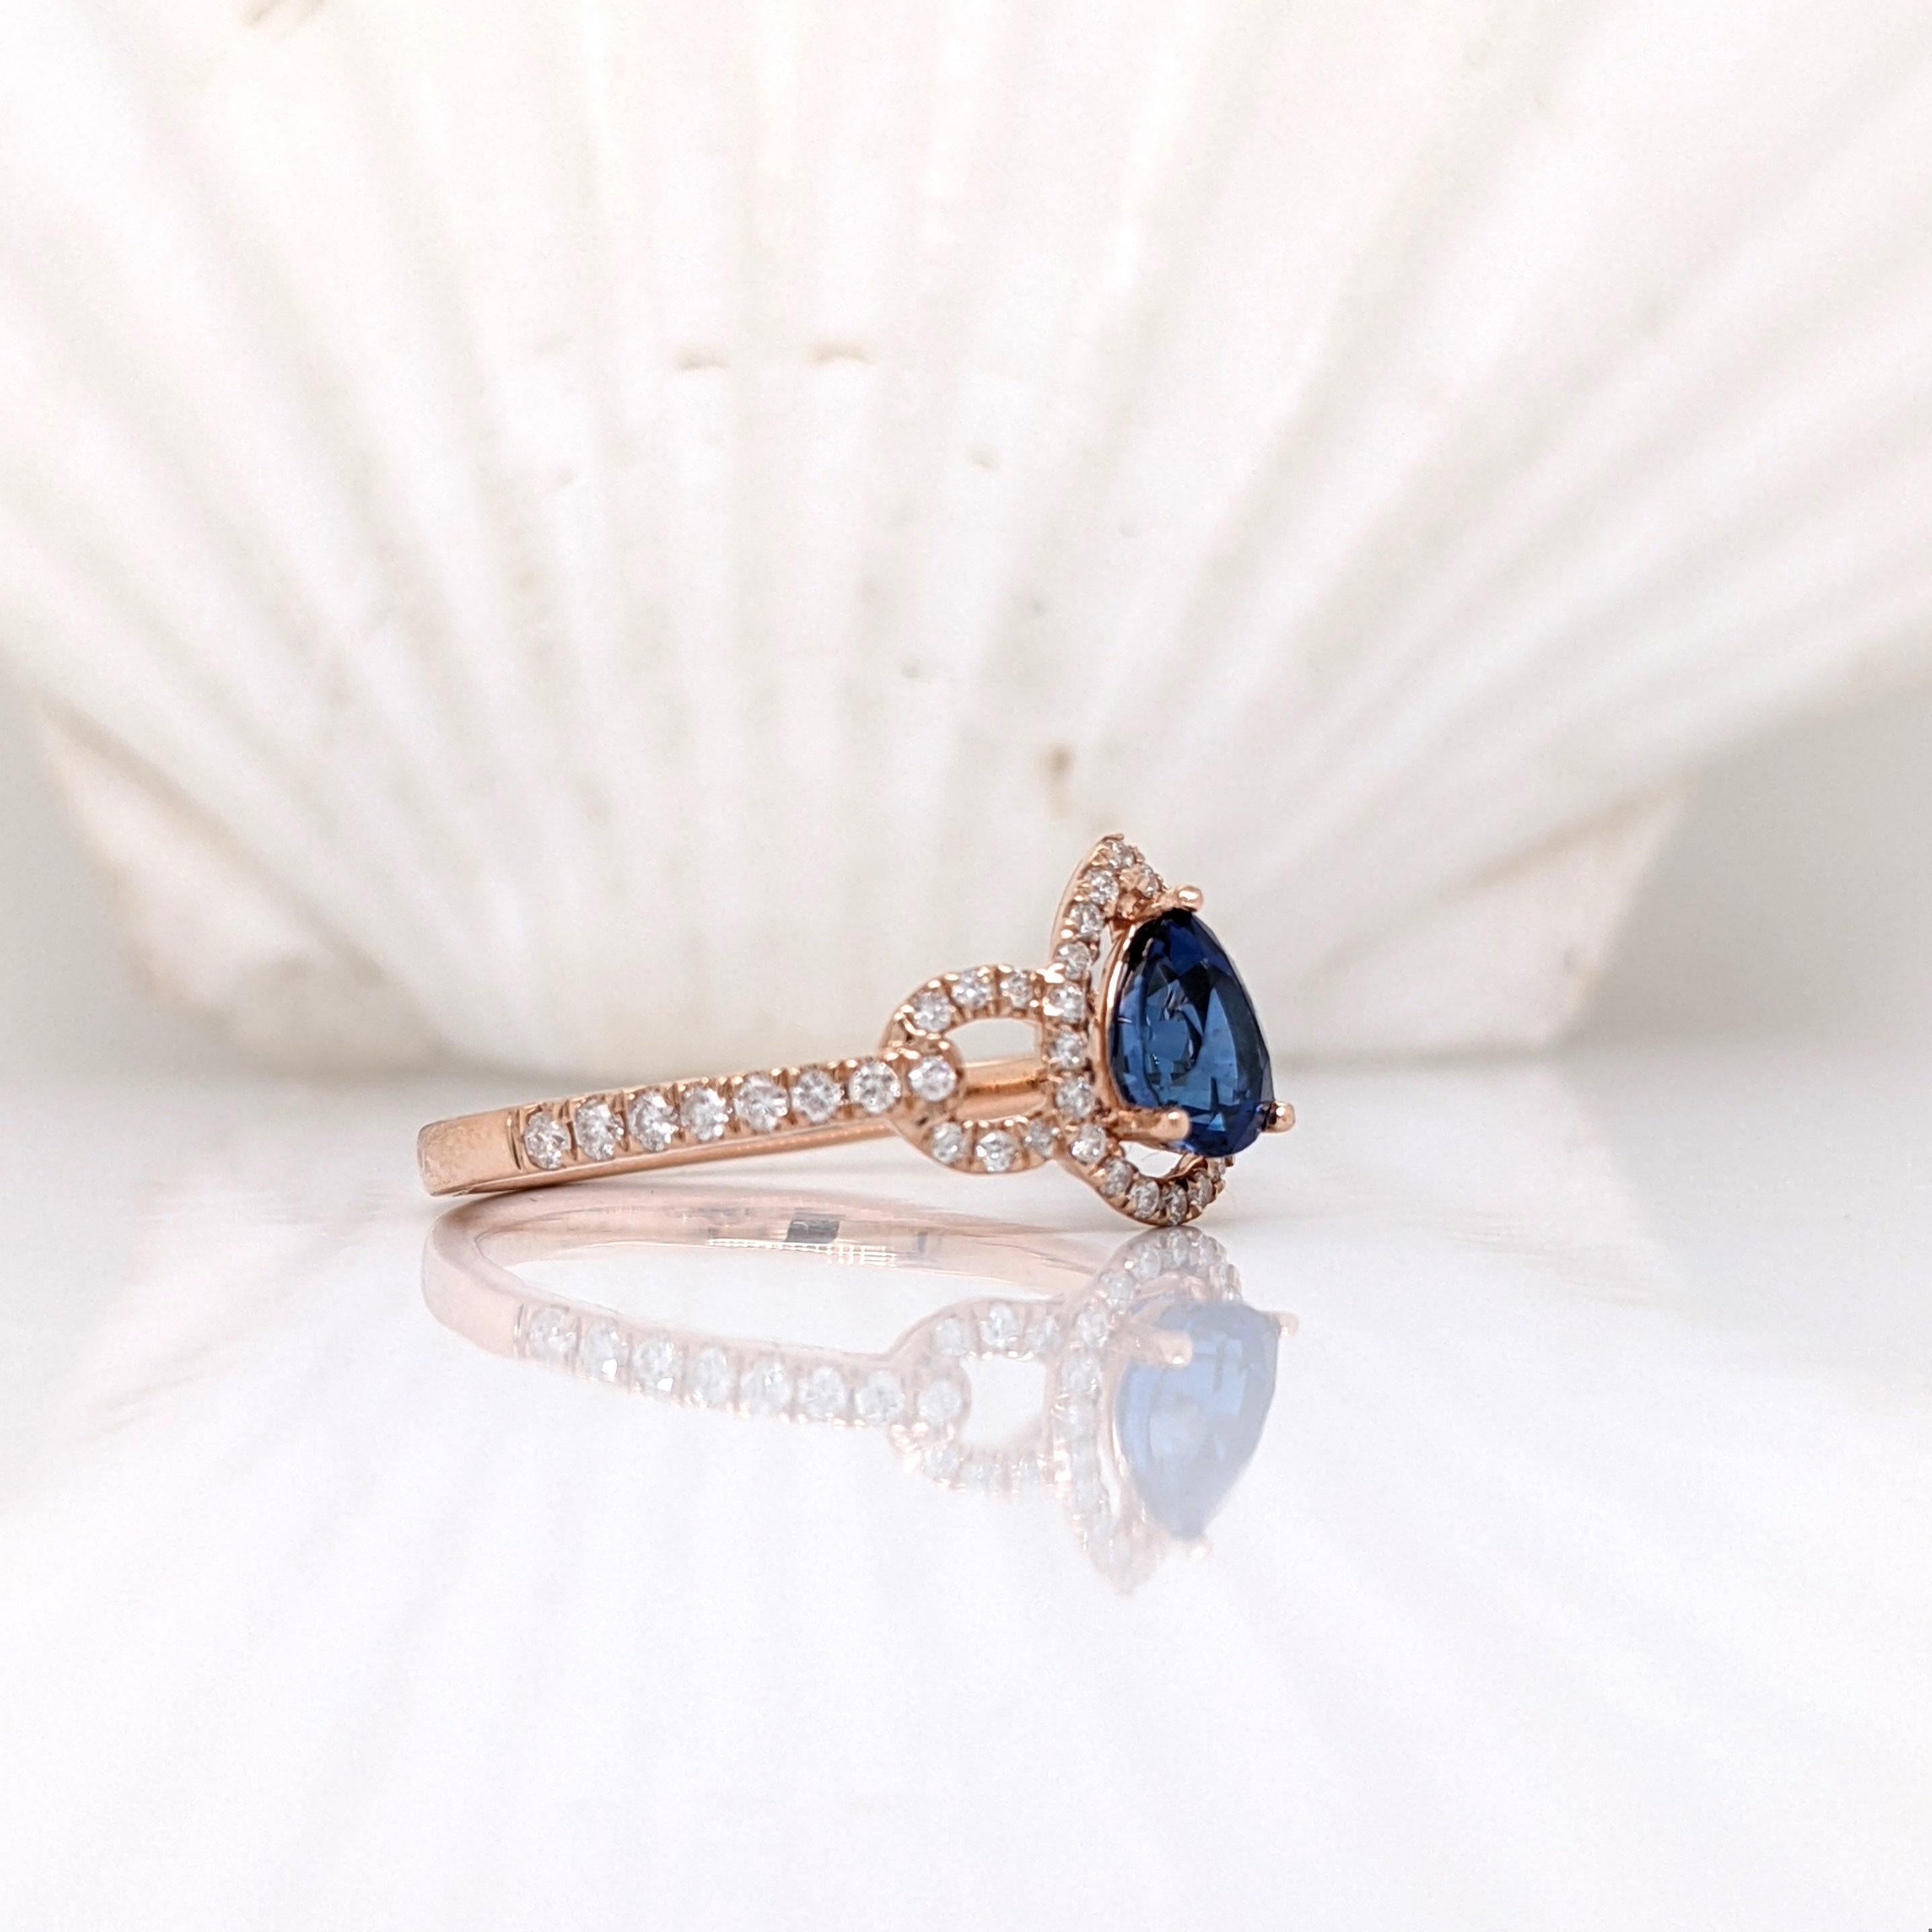 Stunning is an understatement for this ring! The all natural earth mined diamond halo and accents perfectly emphasize the vivid blue in this sapphire from Ceylon. The halo design gives a slightly vintage feel but in the most elegant